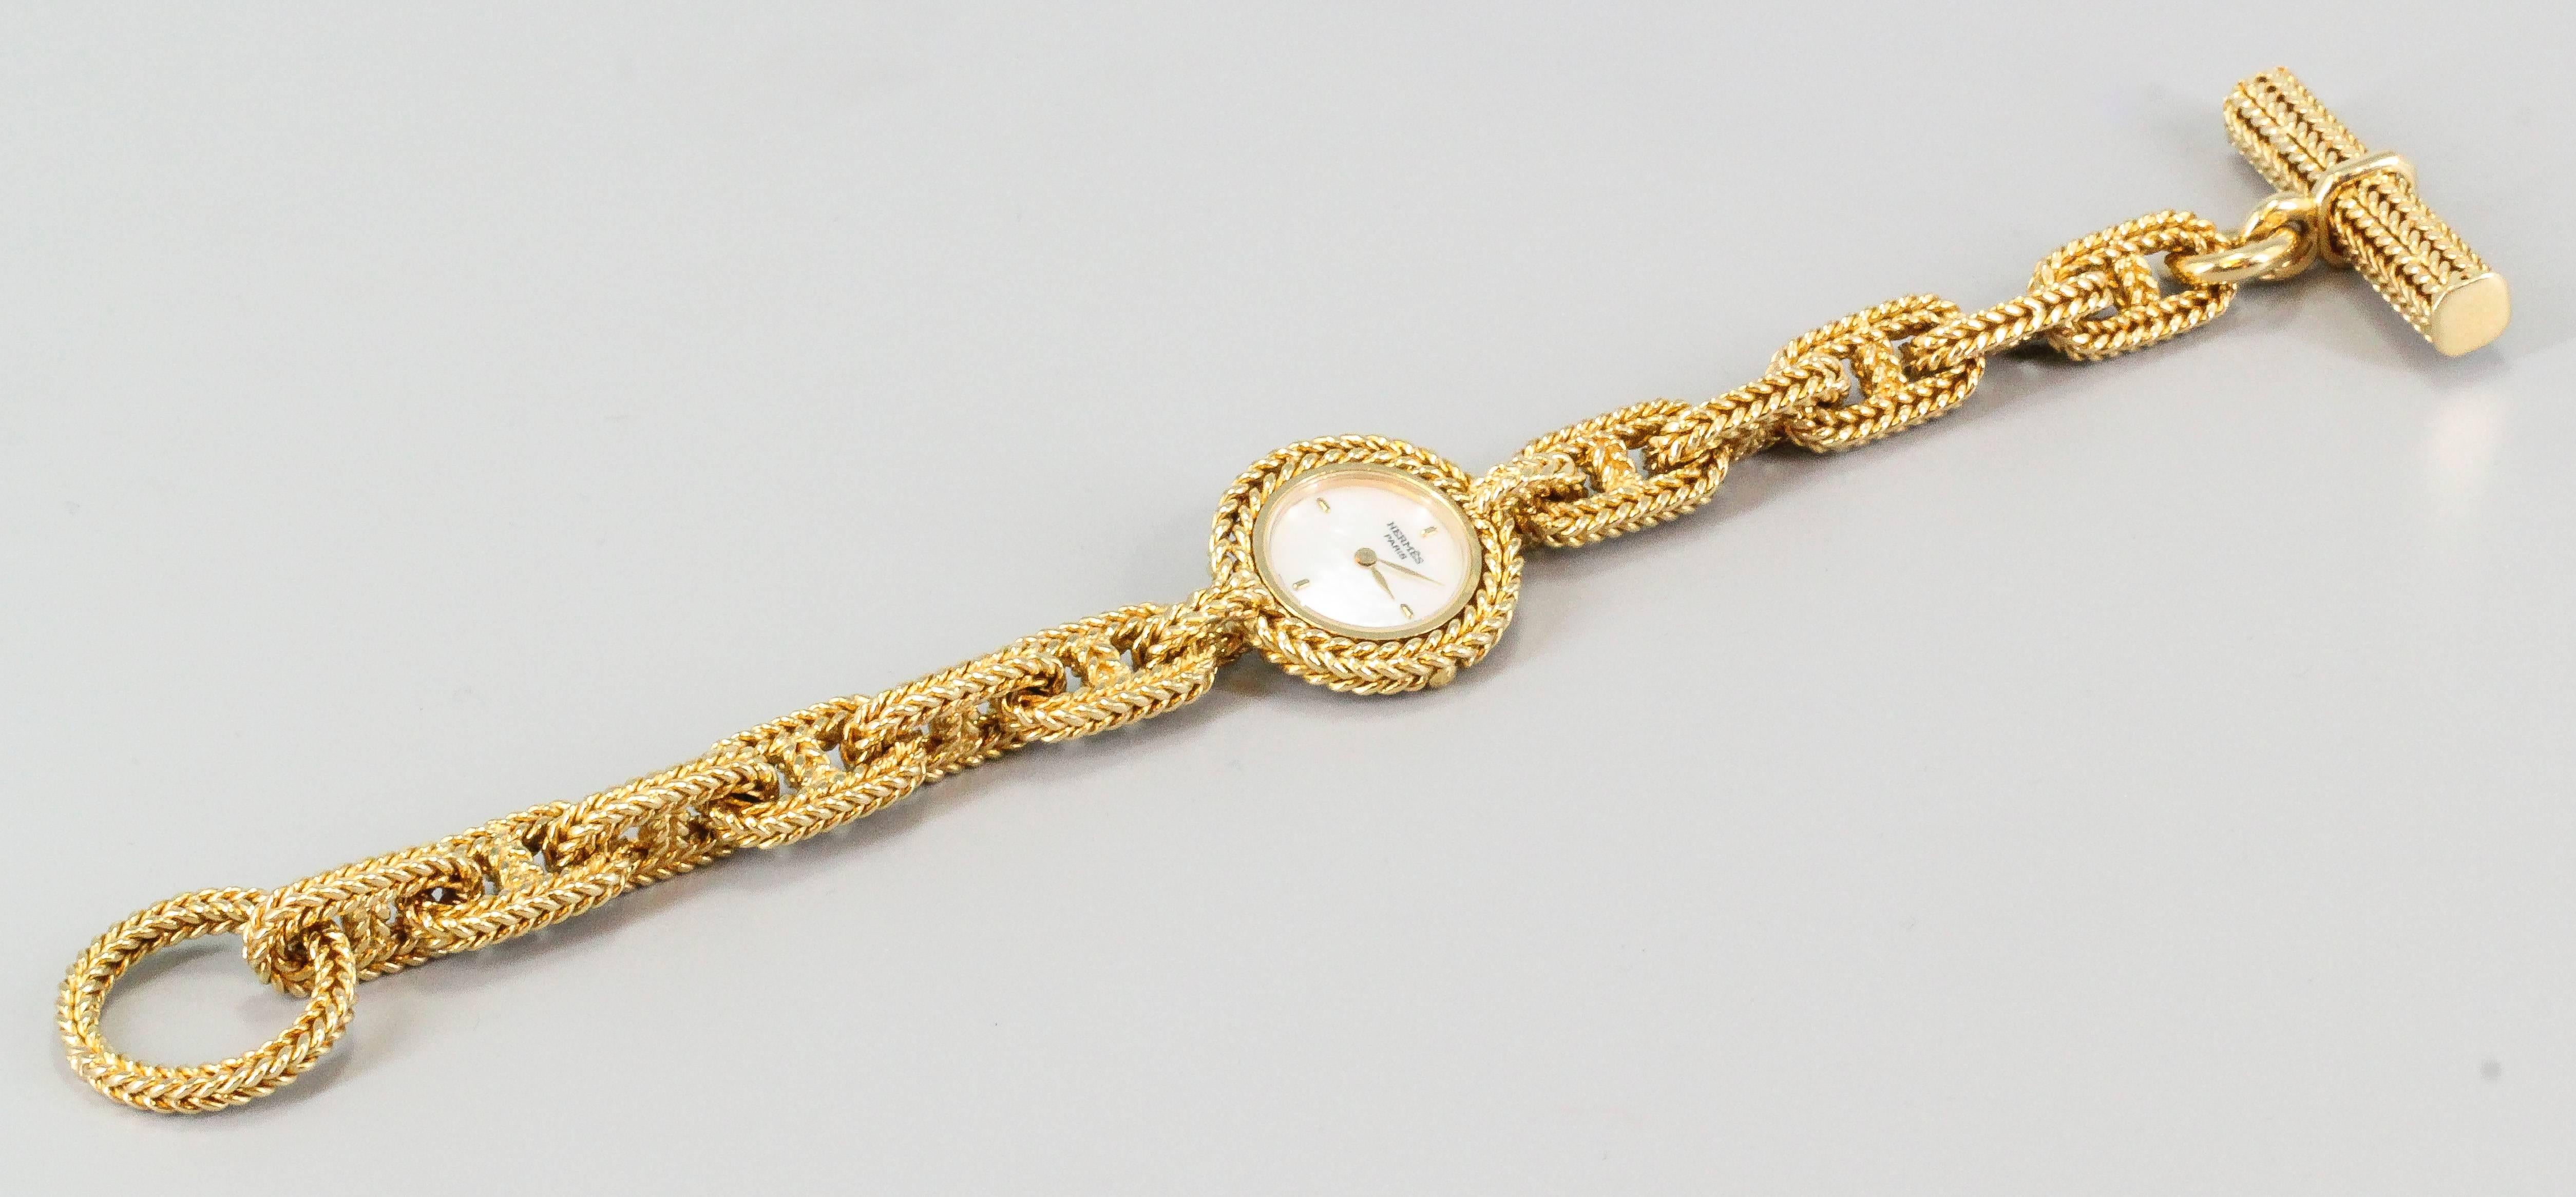 Fine and unusual 18K yellow gold toggle link bracelet watch from the 